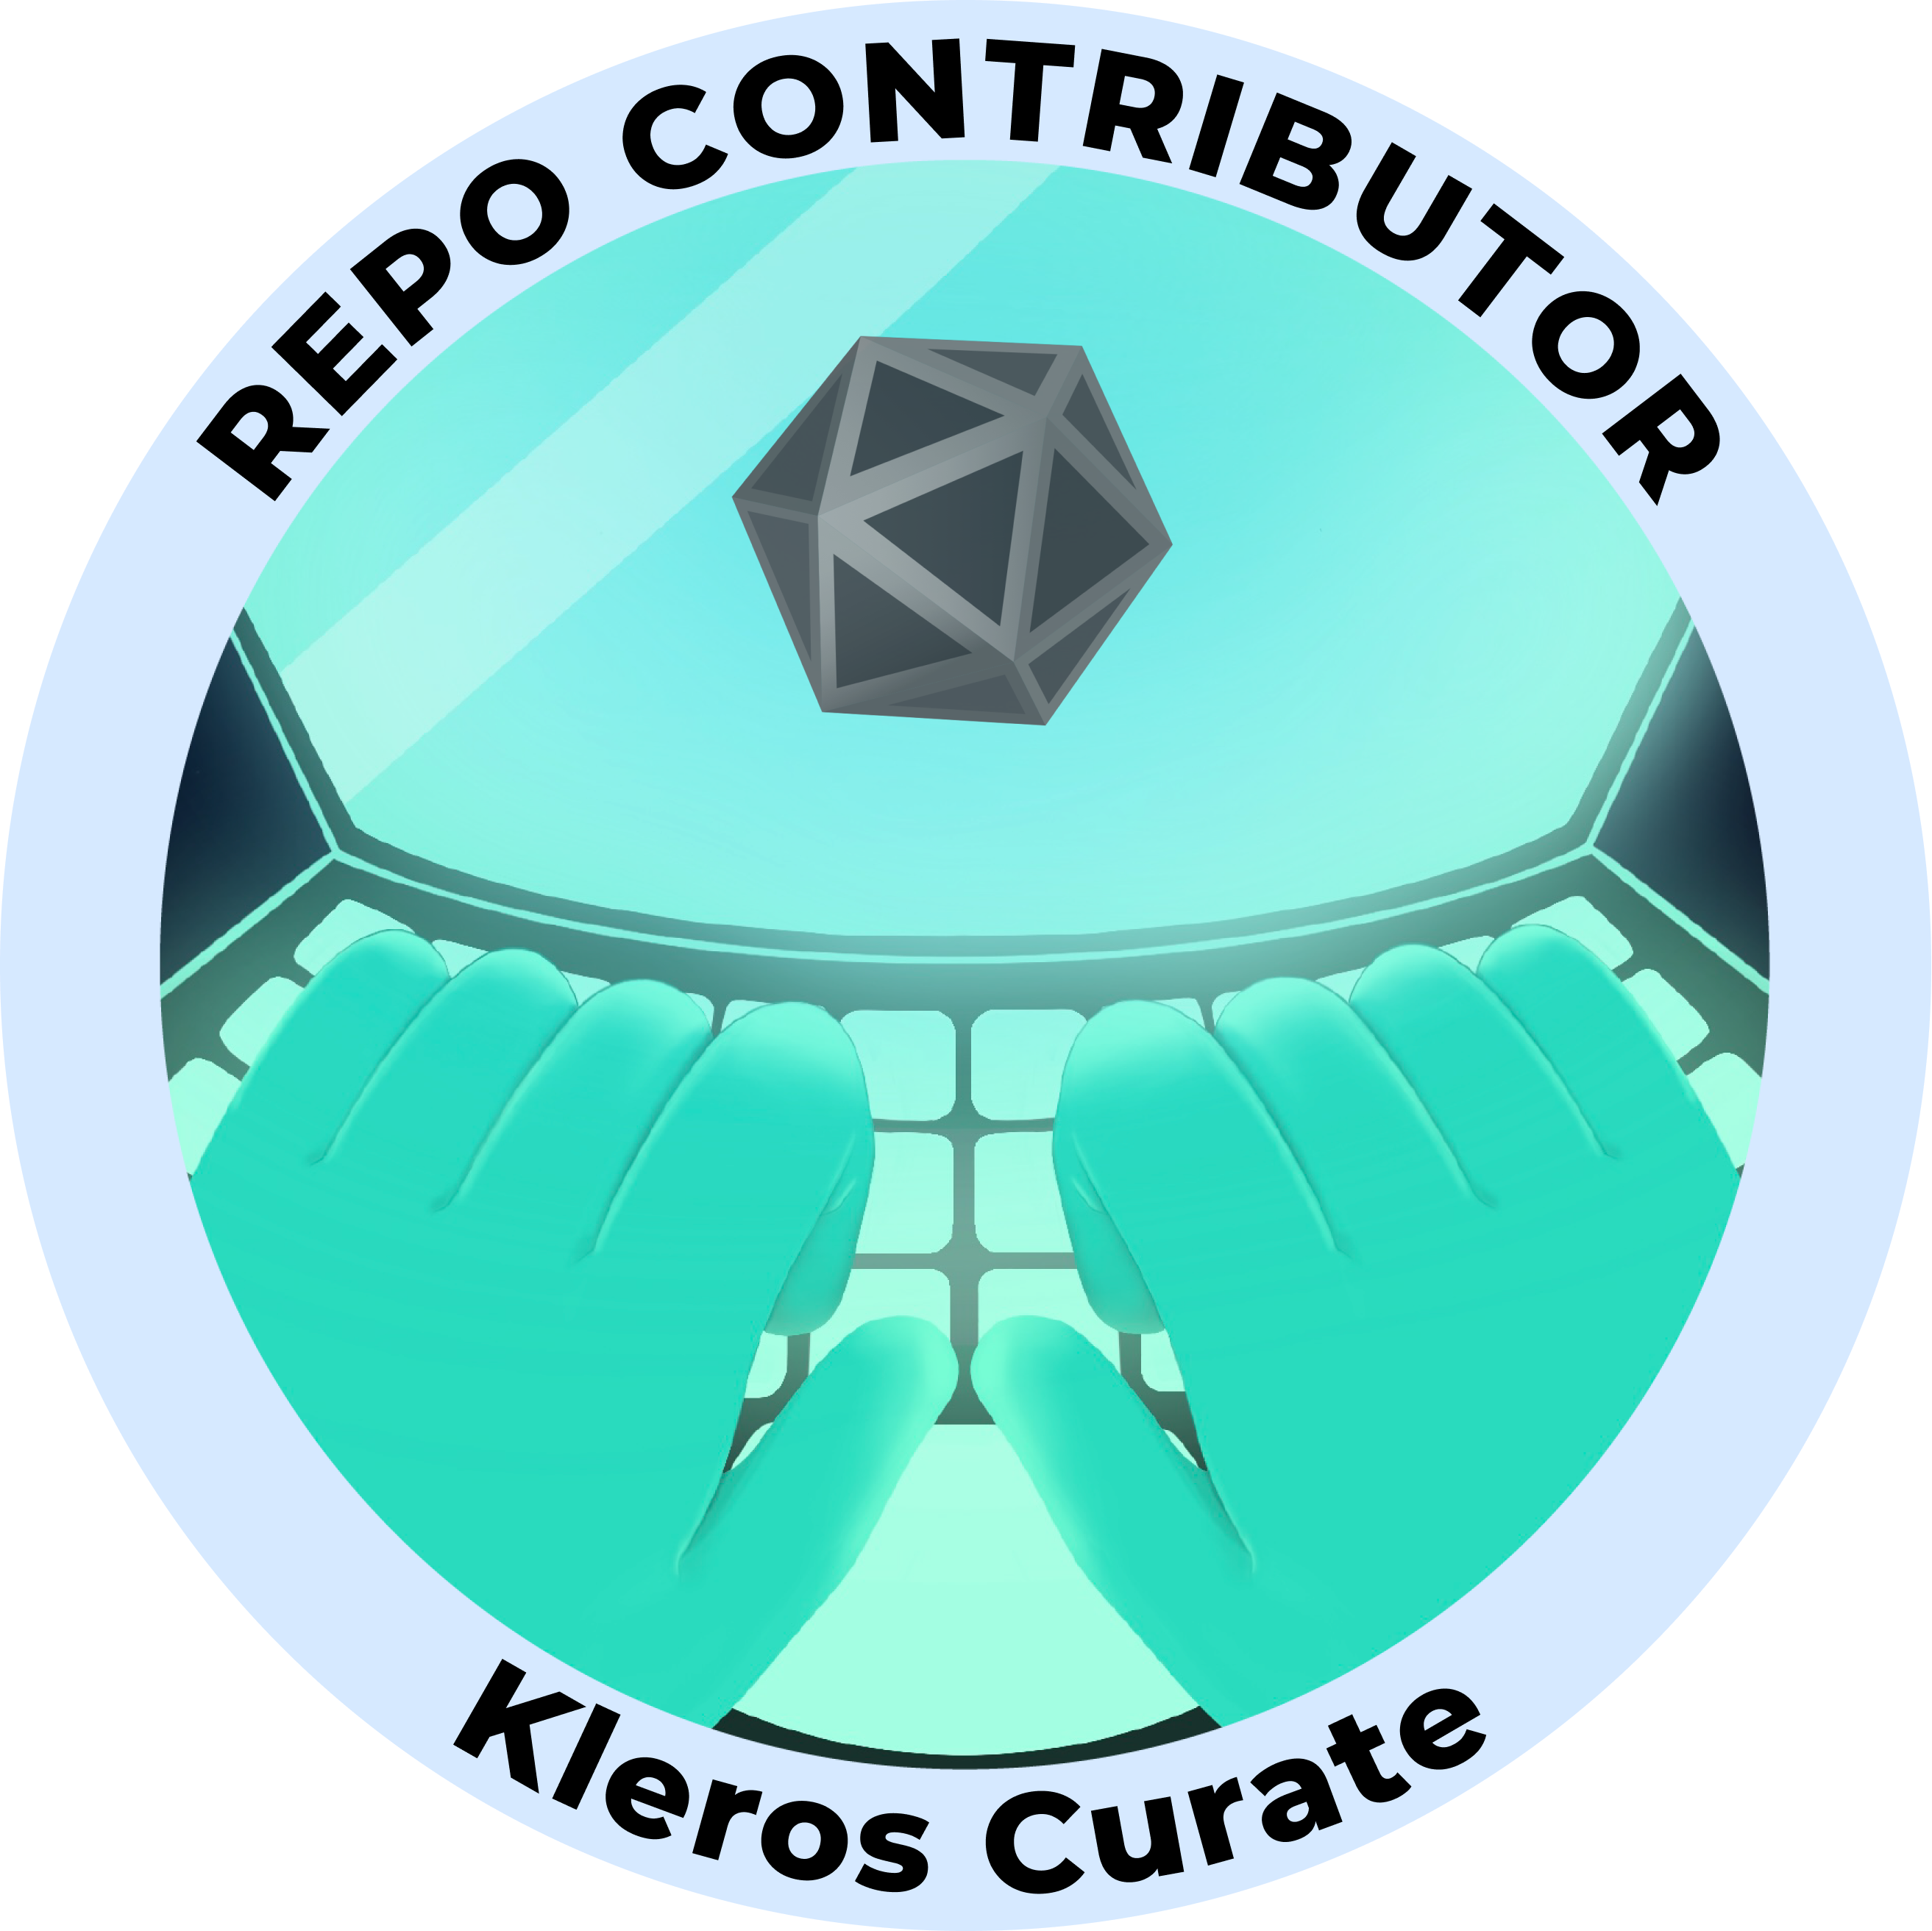 Web3 Badge | Project Contributor: Kleros Curate logo